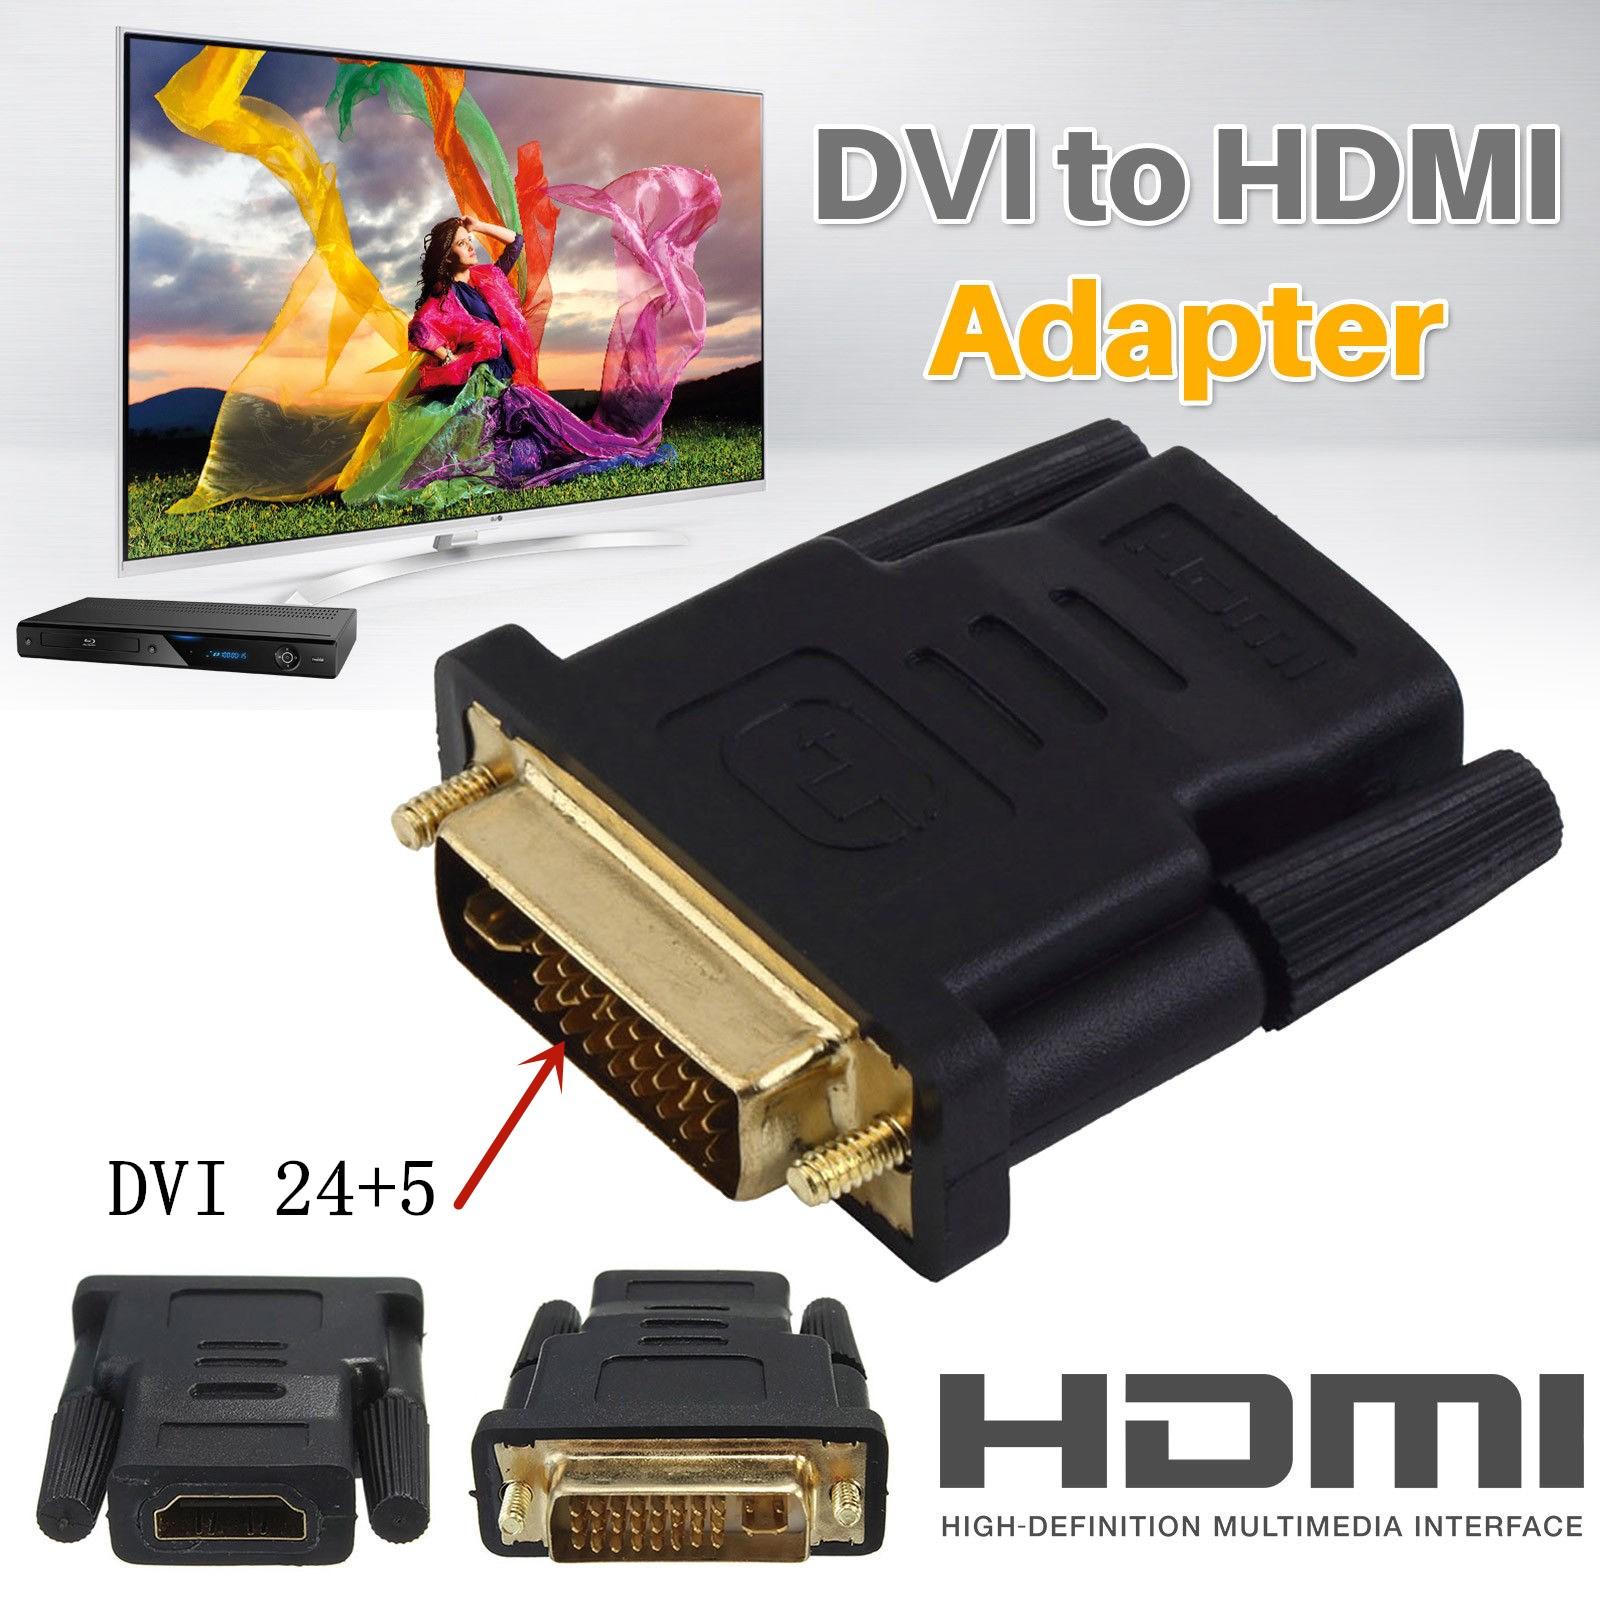 DVI-I 24+5 29-Pin to HDMI (DVI Male to HDMI Female) Gold-Plated Adapter